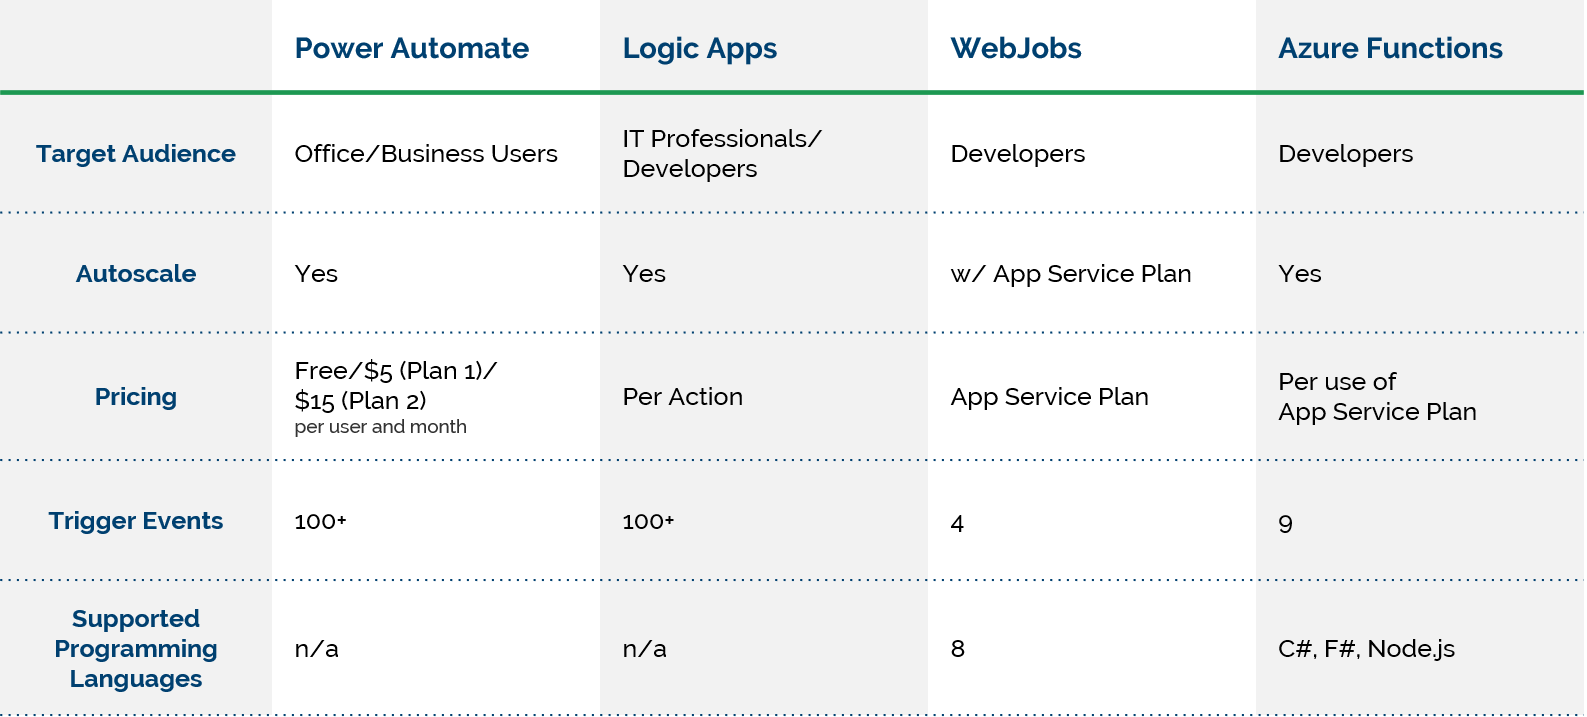 Comparing Flow Power Automate Logic Apps Azure Functions And Webjobs Berlin Prolan Datensysteme Gmbh